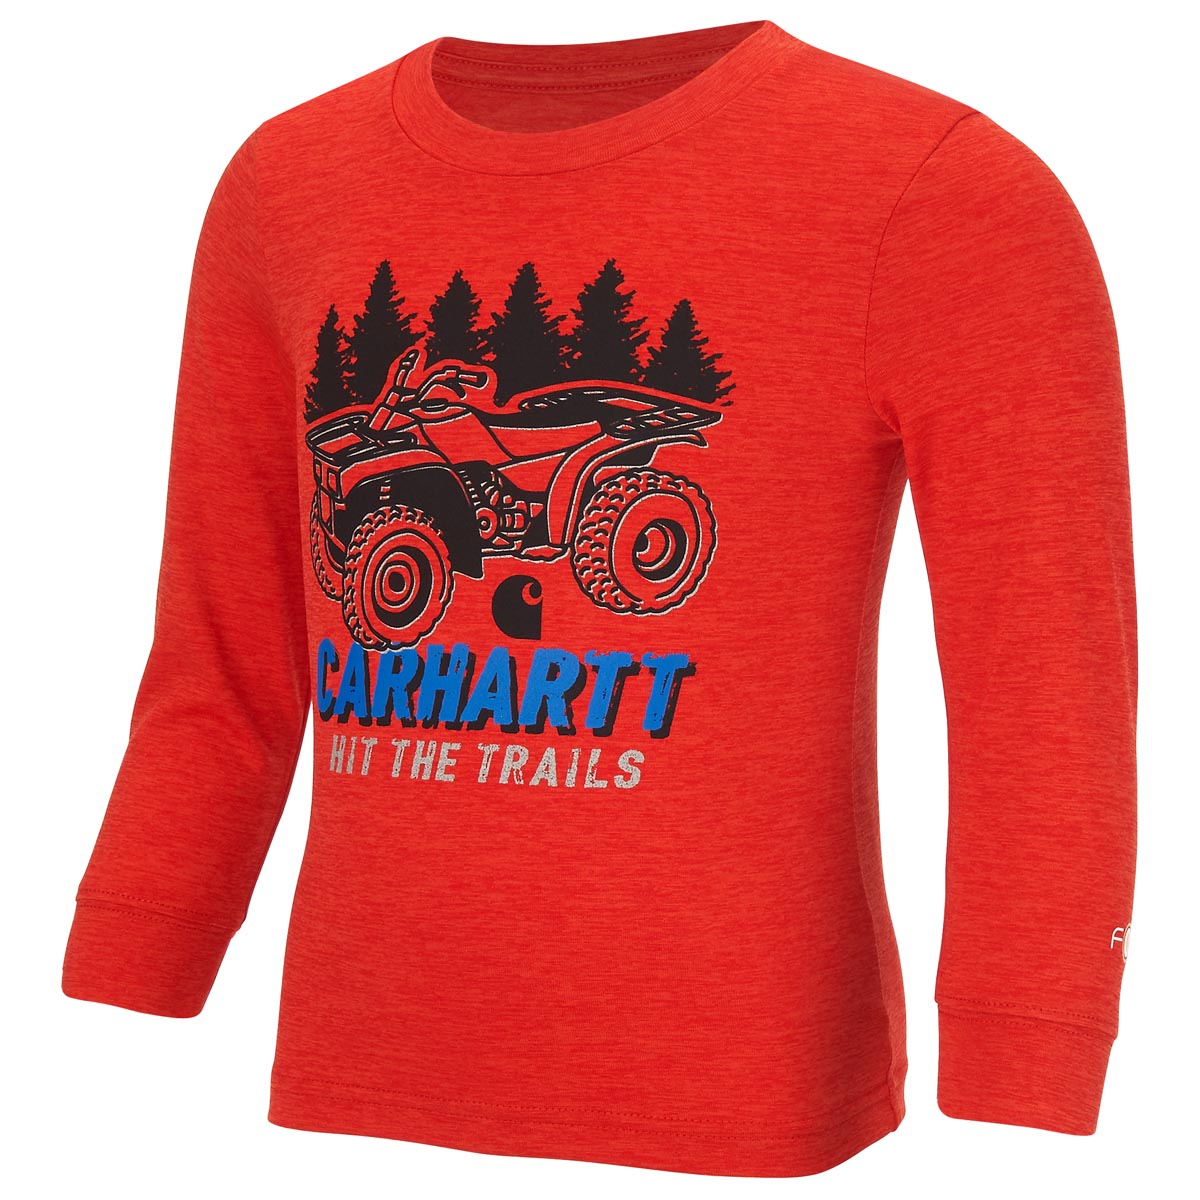 Carhartt Infant and Toddler Boys Hit The Trails Force Logo Tee